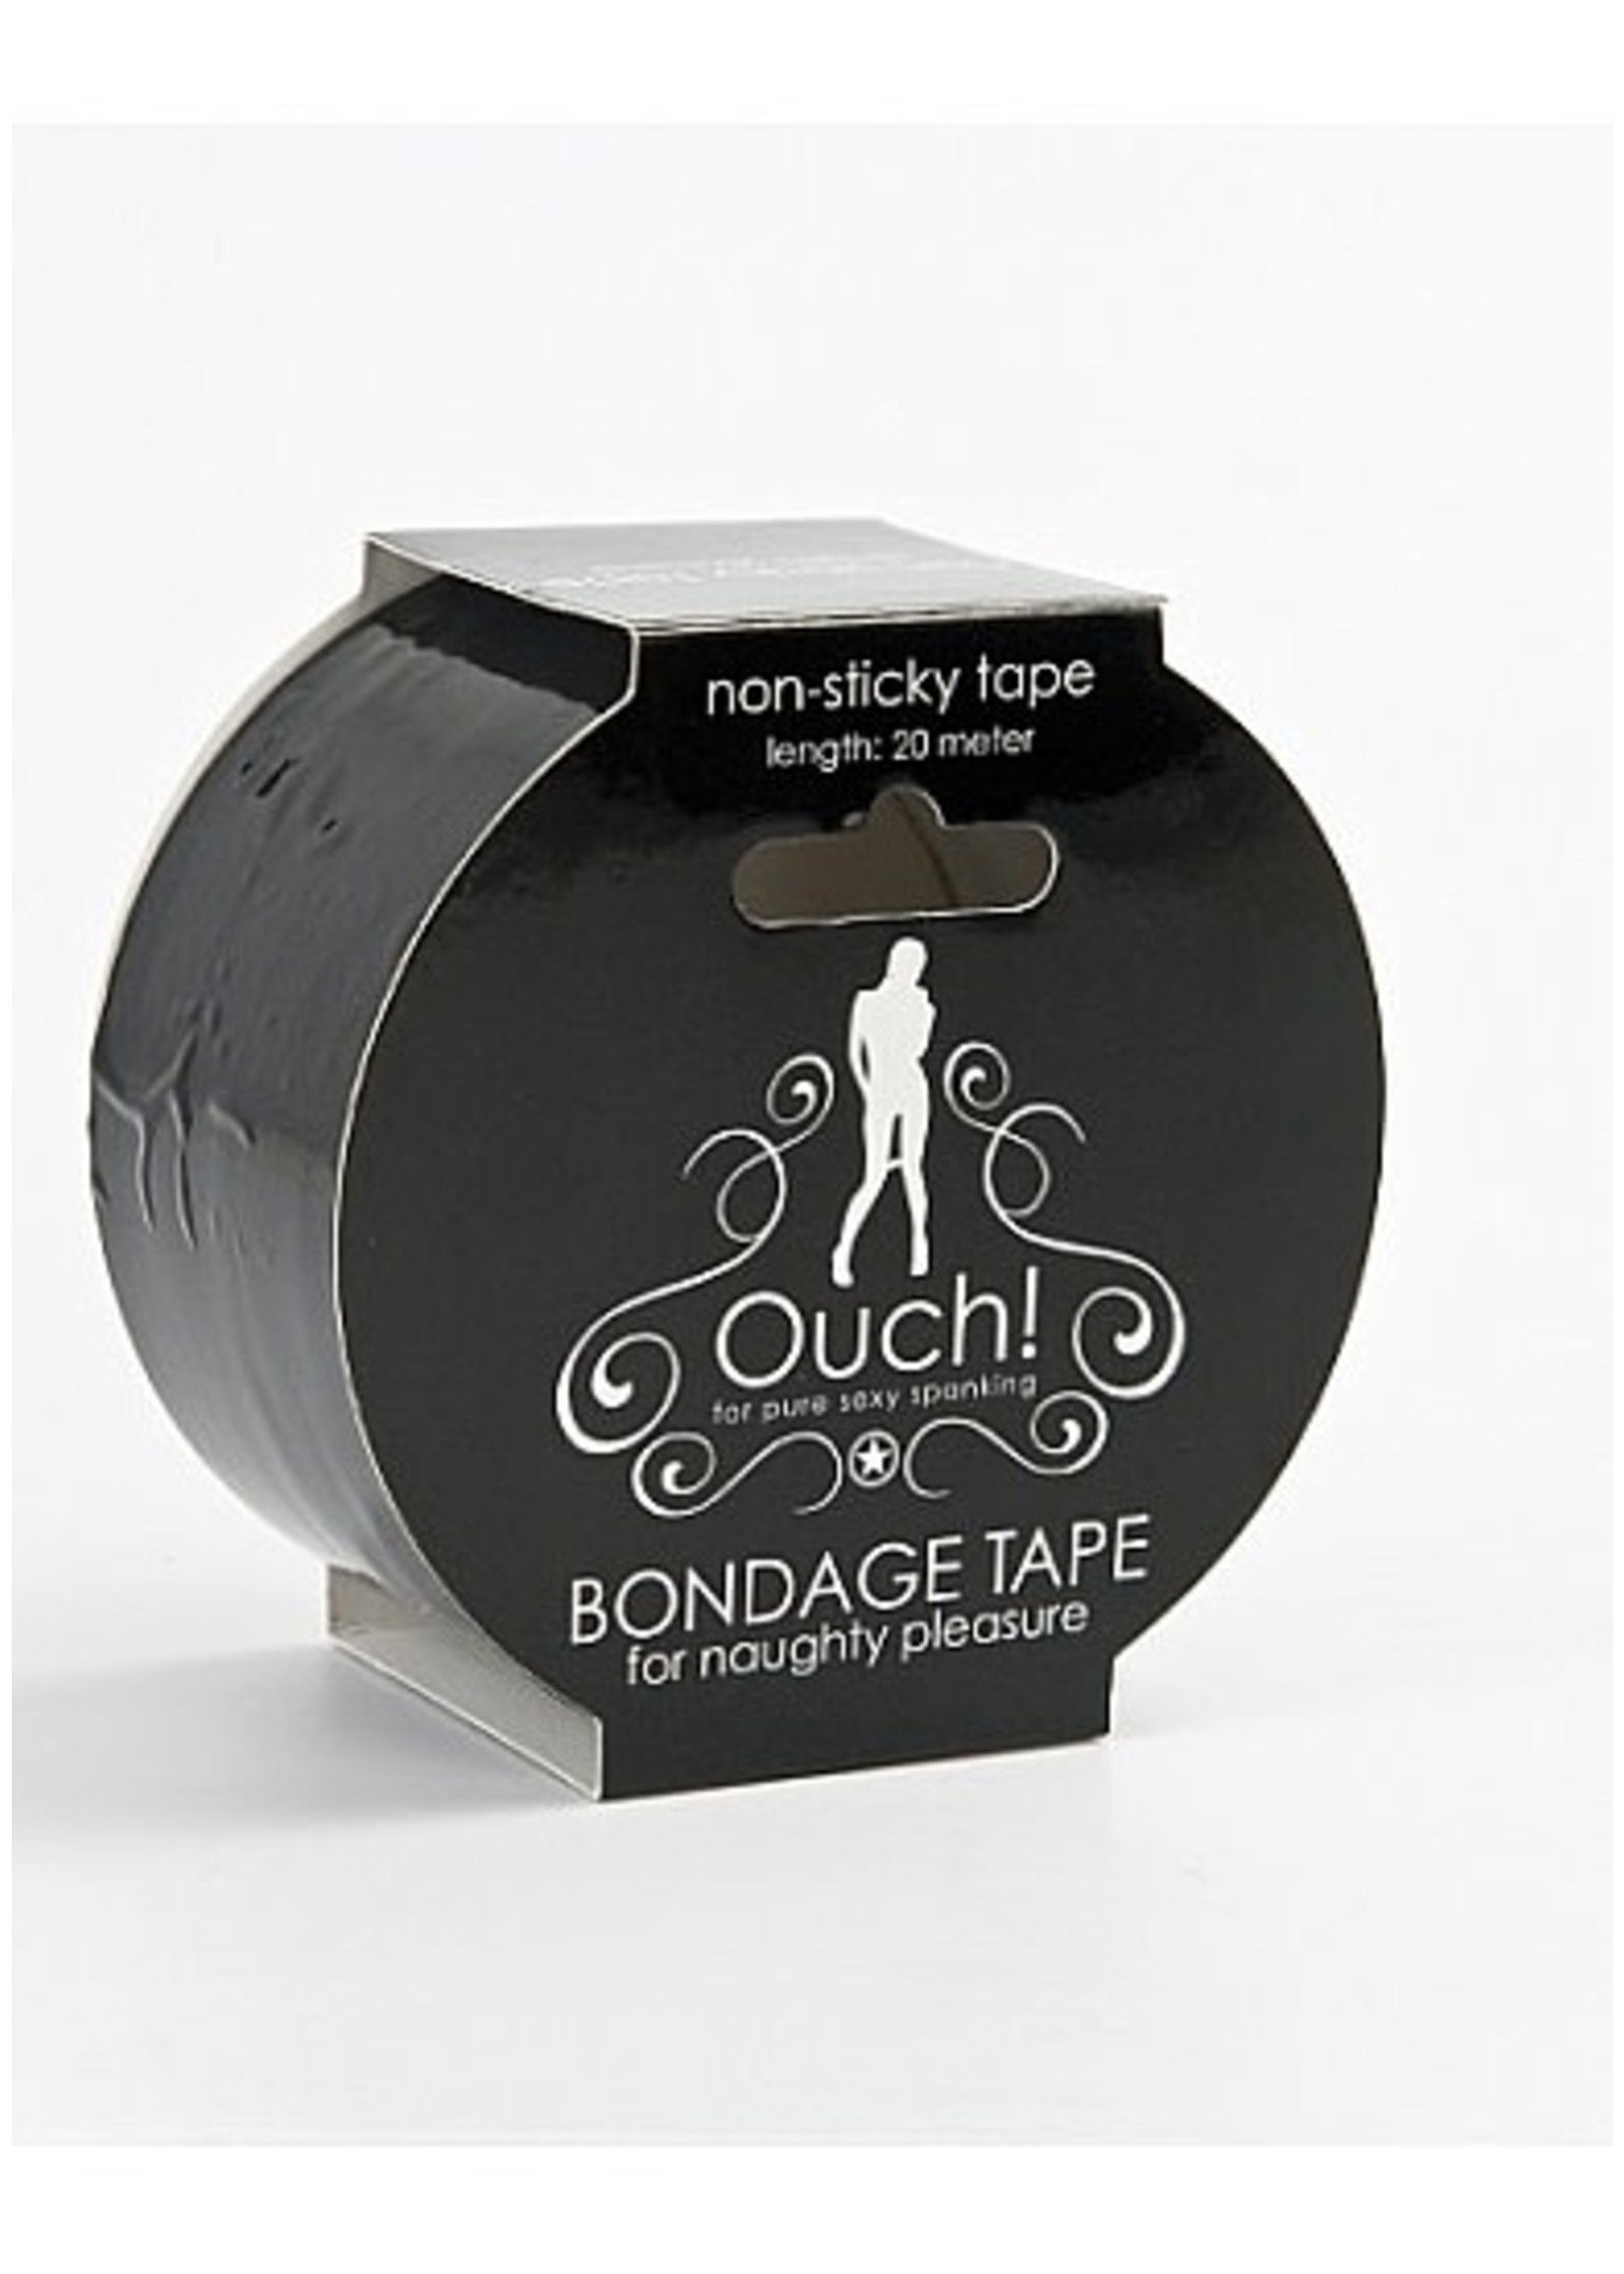 Ouch! Bondage tape for naughty pleasure black 20 m